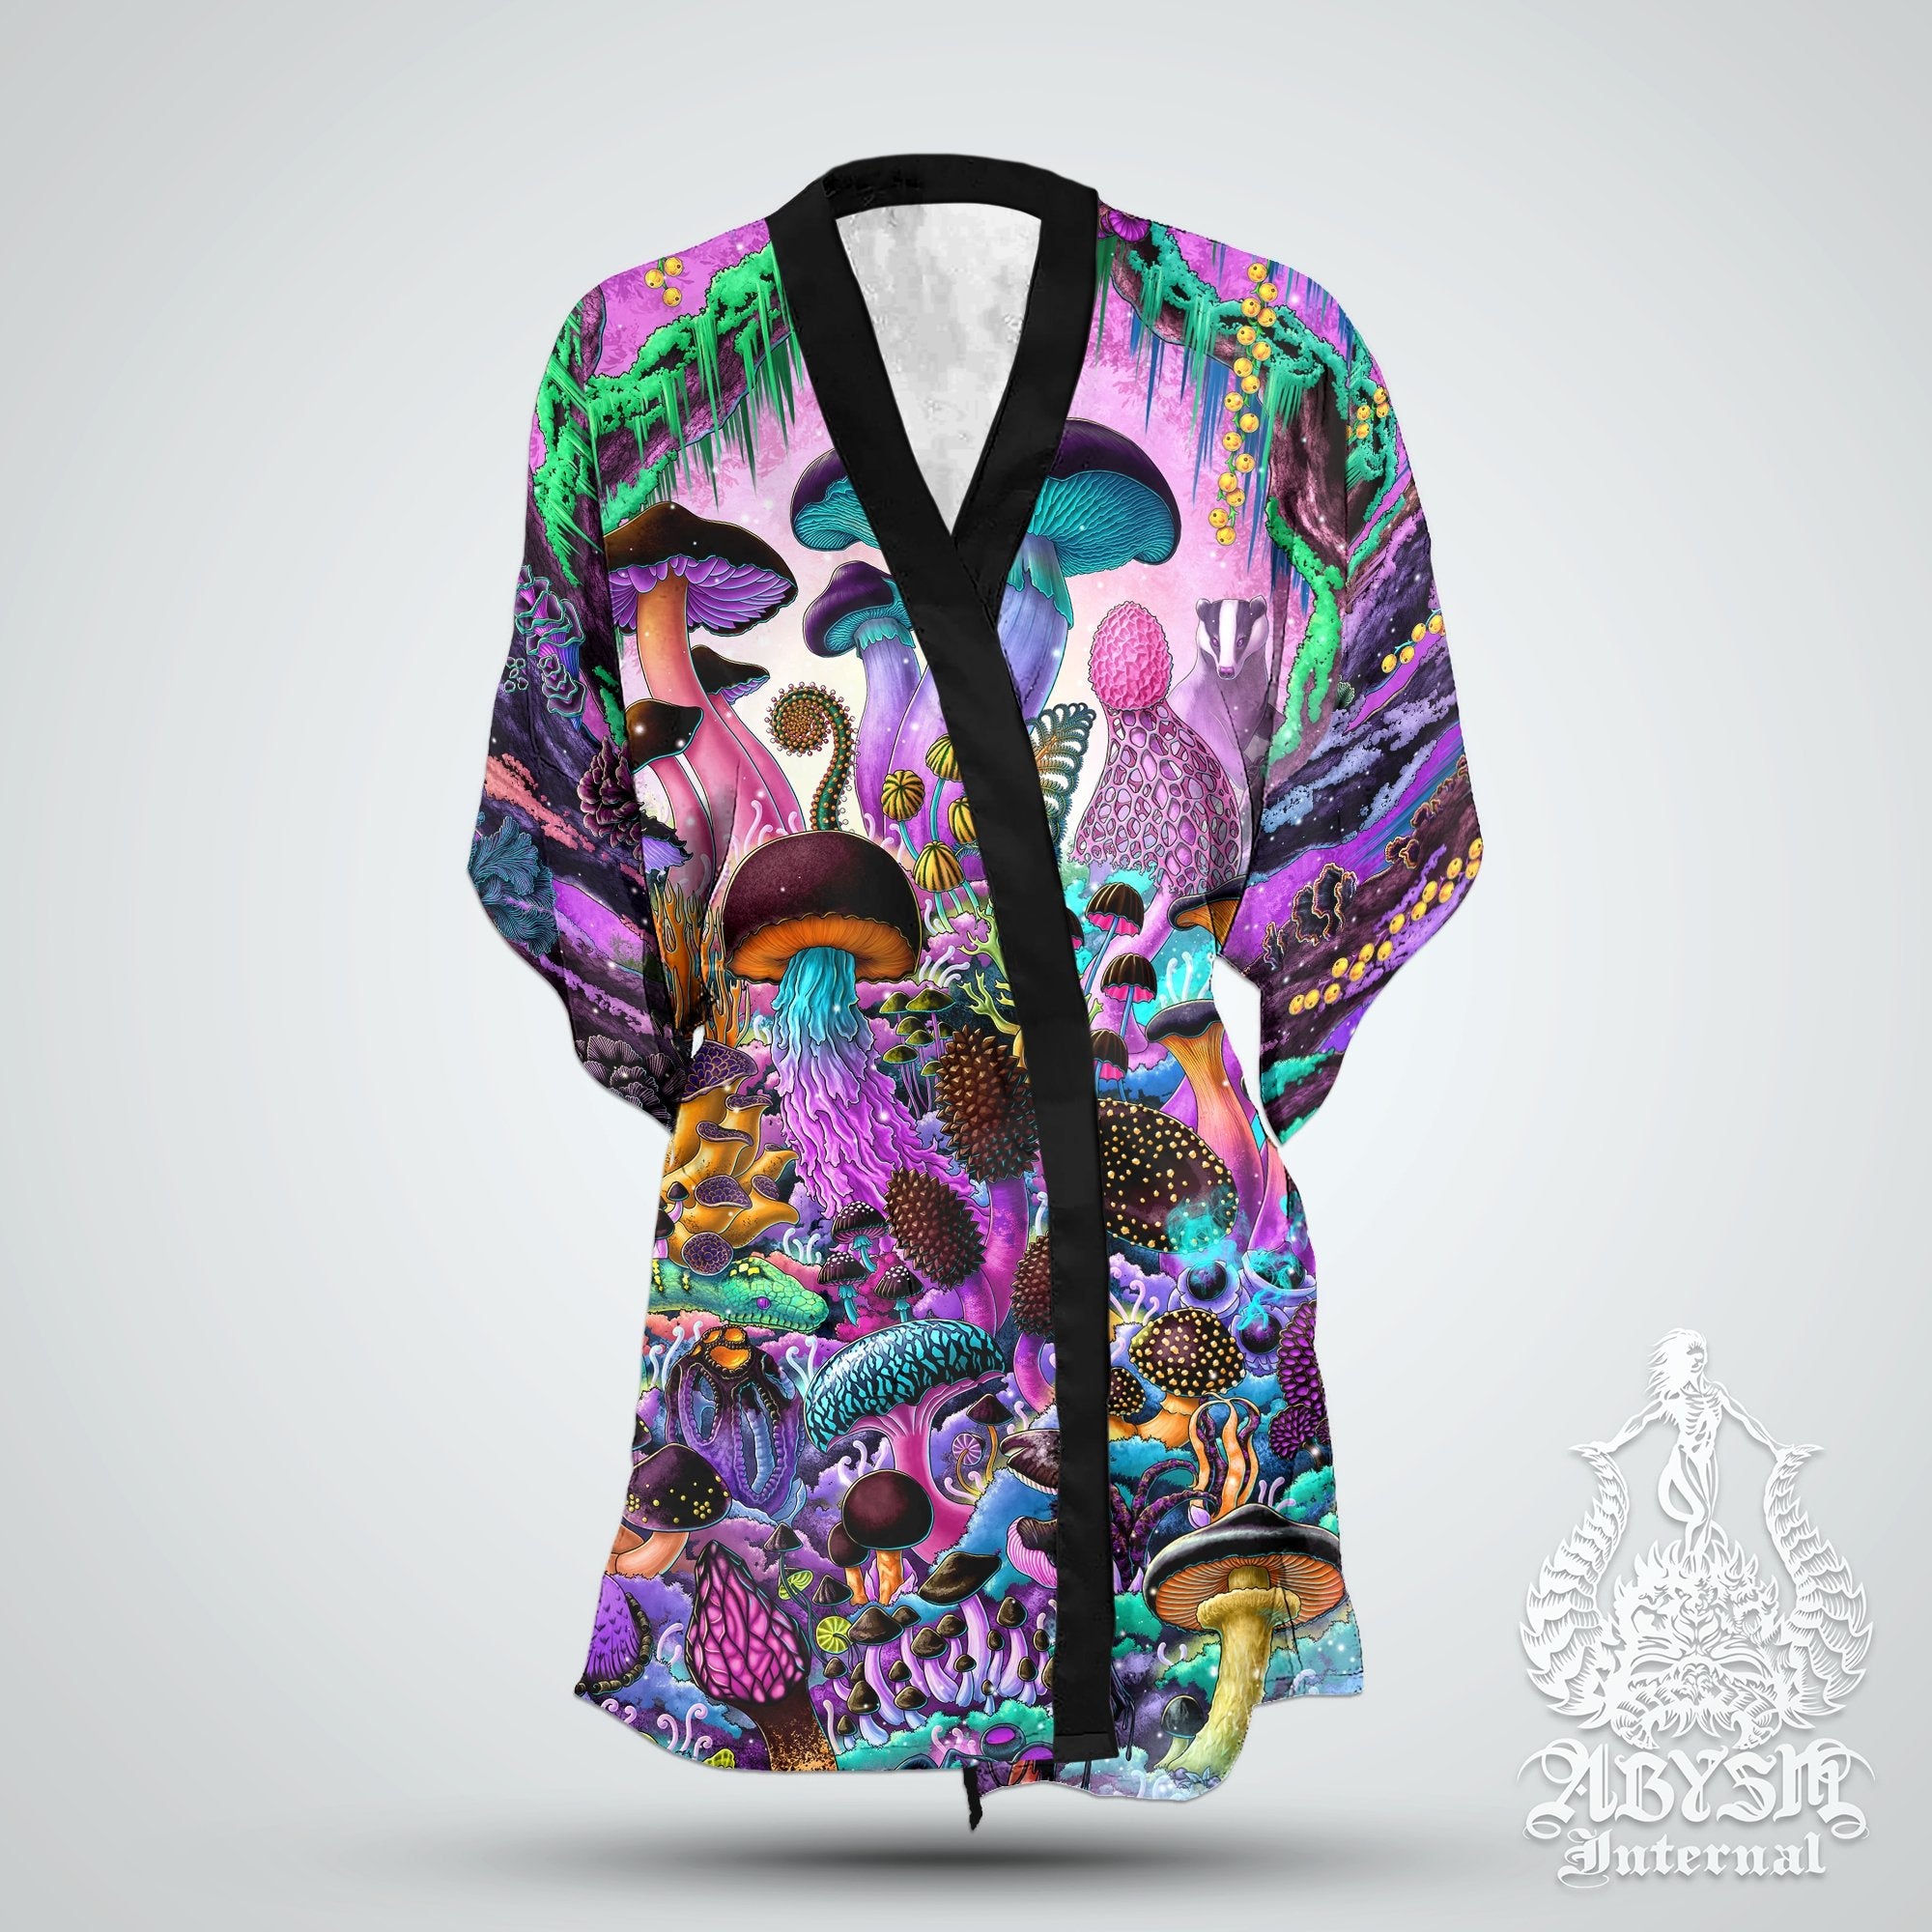 Mushrooms Cover Up, Aesthetic Outfit, Indie Party Kimono, Summer Festival Robe, Psychedelic Magic Shrooms Gift, Alternative Clothing, Unisex - Pastel Black - Abysm Internal